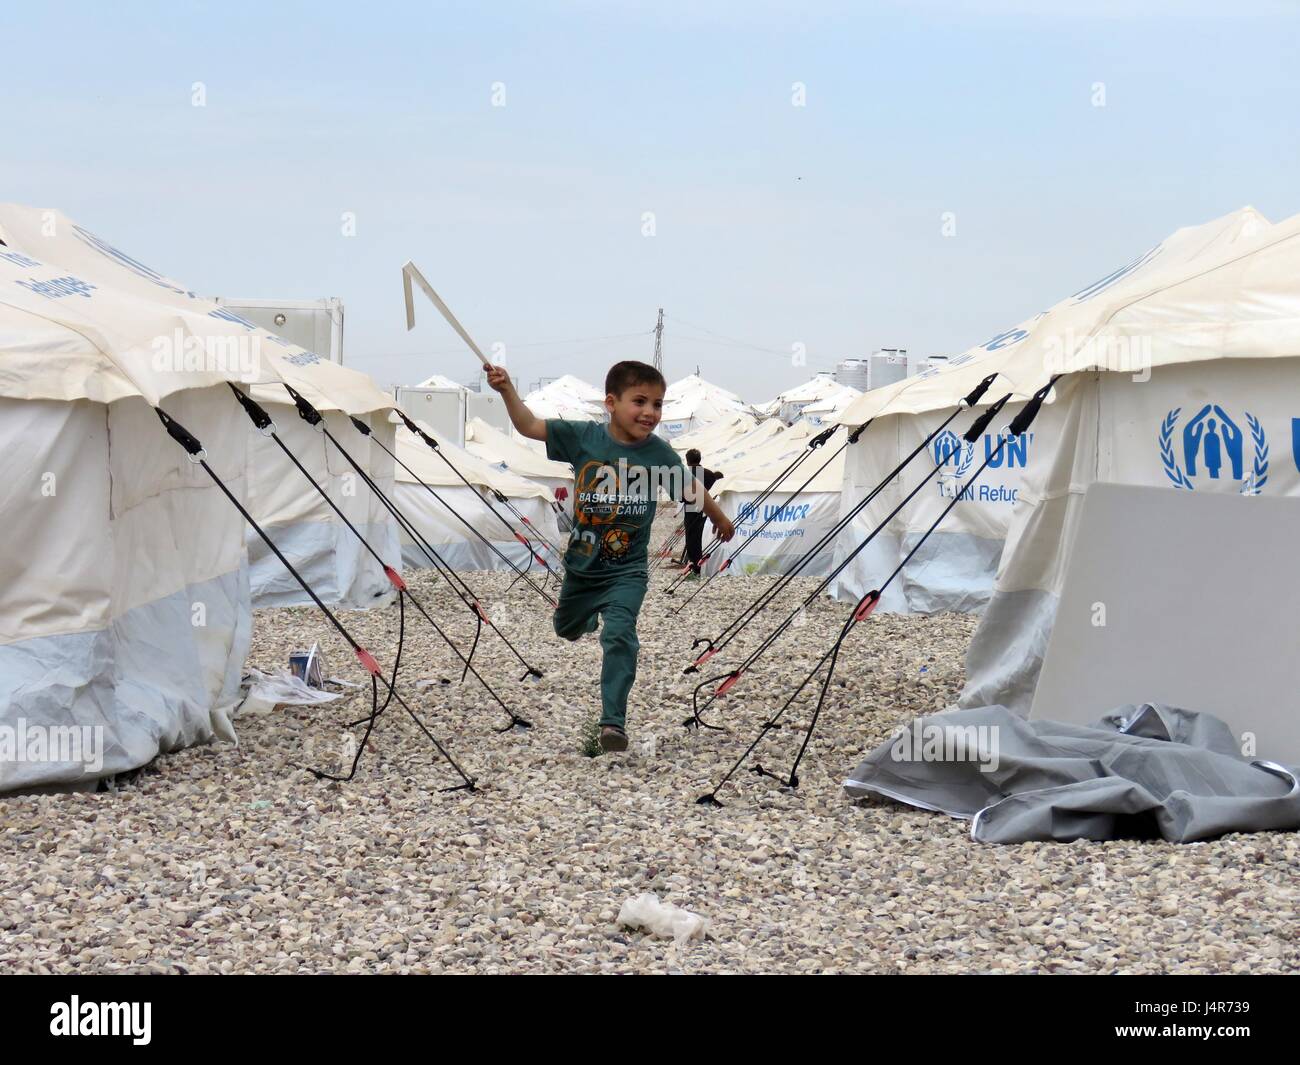 Mosul, Iraq. 13th May, 2017. A boy runs in the Hassansham U2 Camp, about 30 kms east to Mosul, Iraq, on May 13, 2017. The camp has a capacity to accommodate more than 9,000 people when fully occupied. According to Iraqi authorities, more than 630,000 people have been displaced from Mosul and surrounding areas since October 2016, when the military operation began. This includes more than 434,000 displaced from western Mosul since mid-February of this year. Credit: Khalil Dawood/Xinhua/Alamy Live News Stock Photo